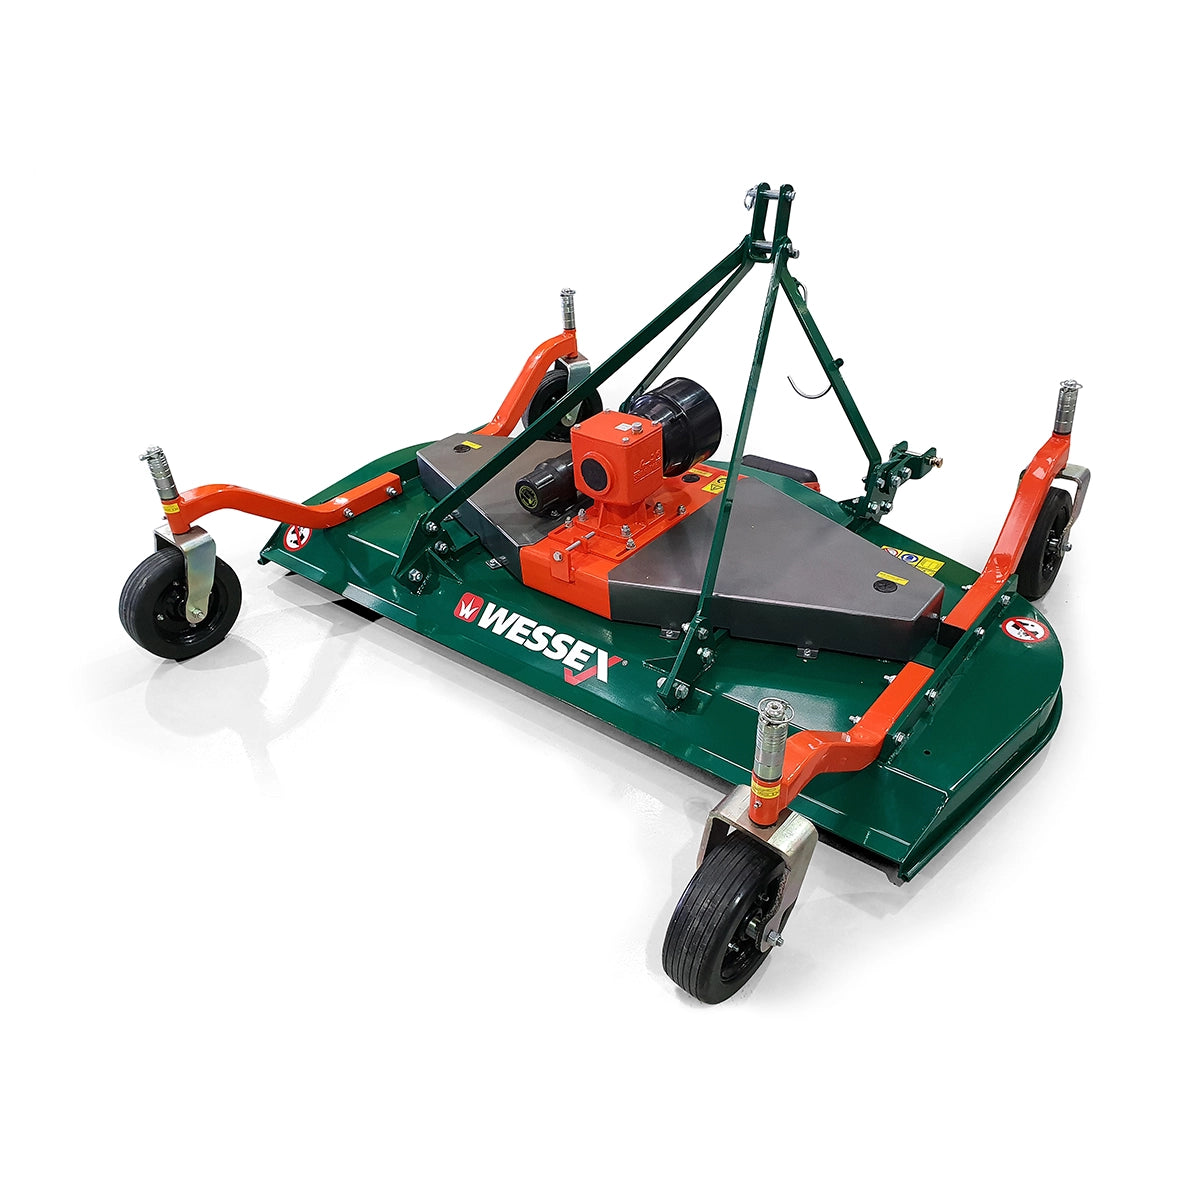 Wessex CMT-150 Finishing Mower